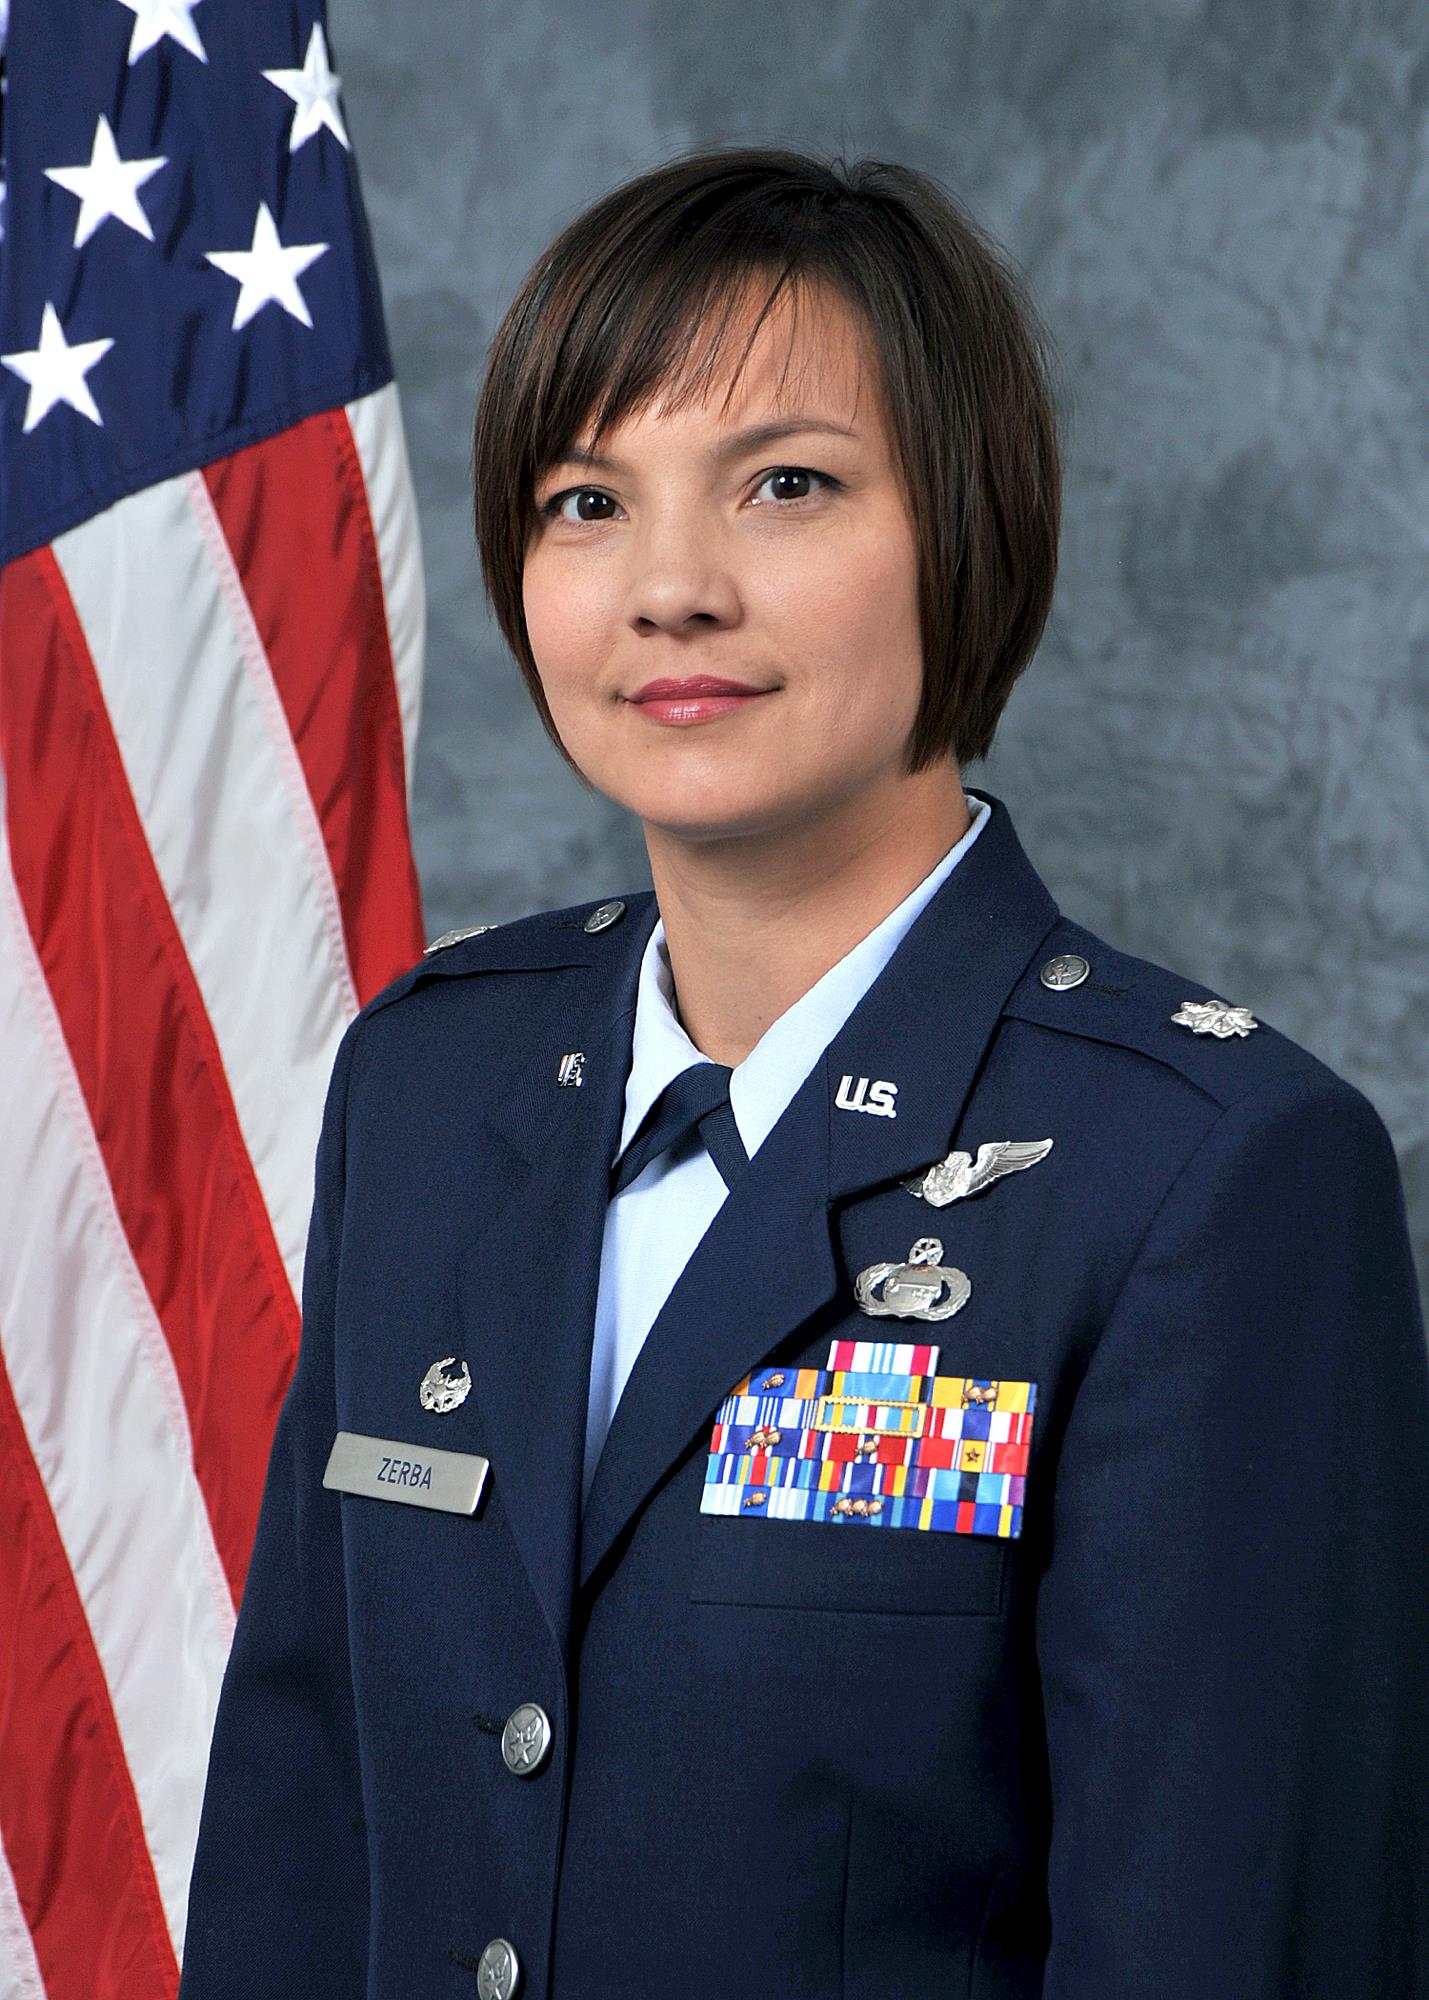 A U.S. Air Force veteran with degrees in political science and security studies